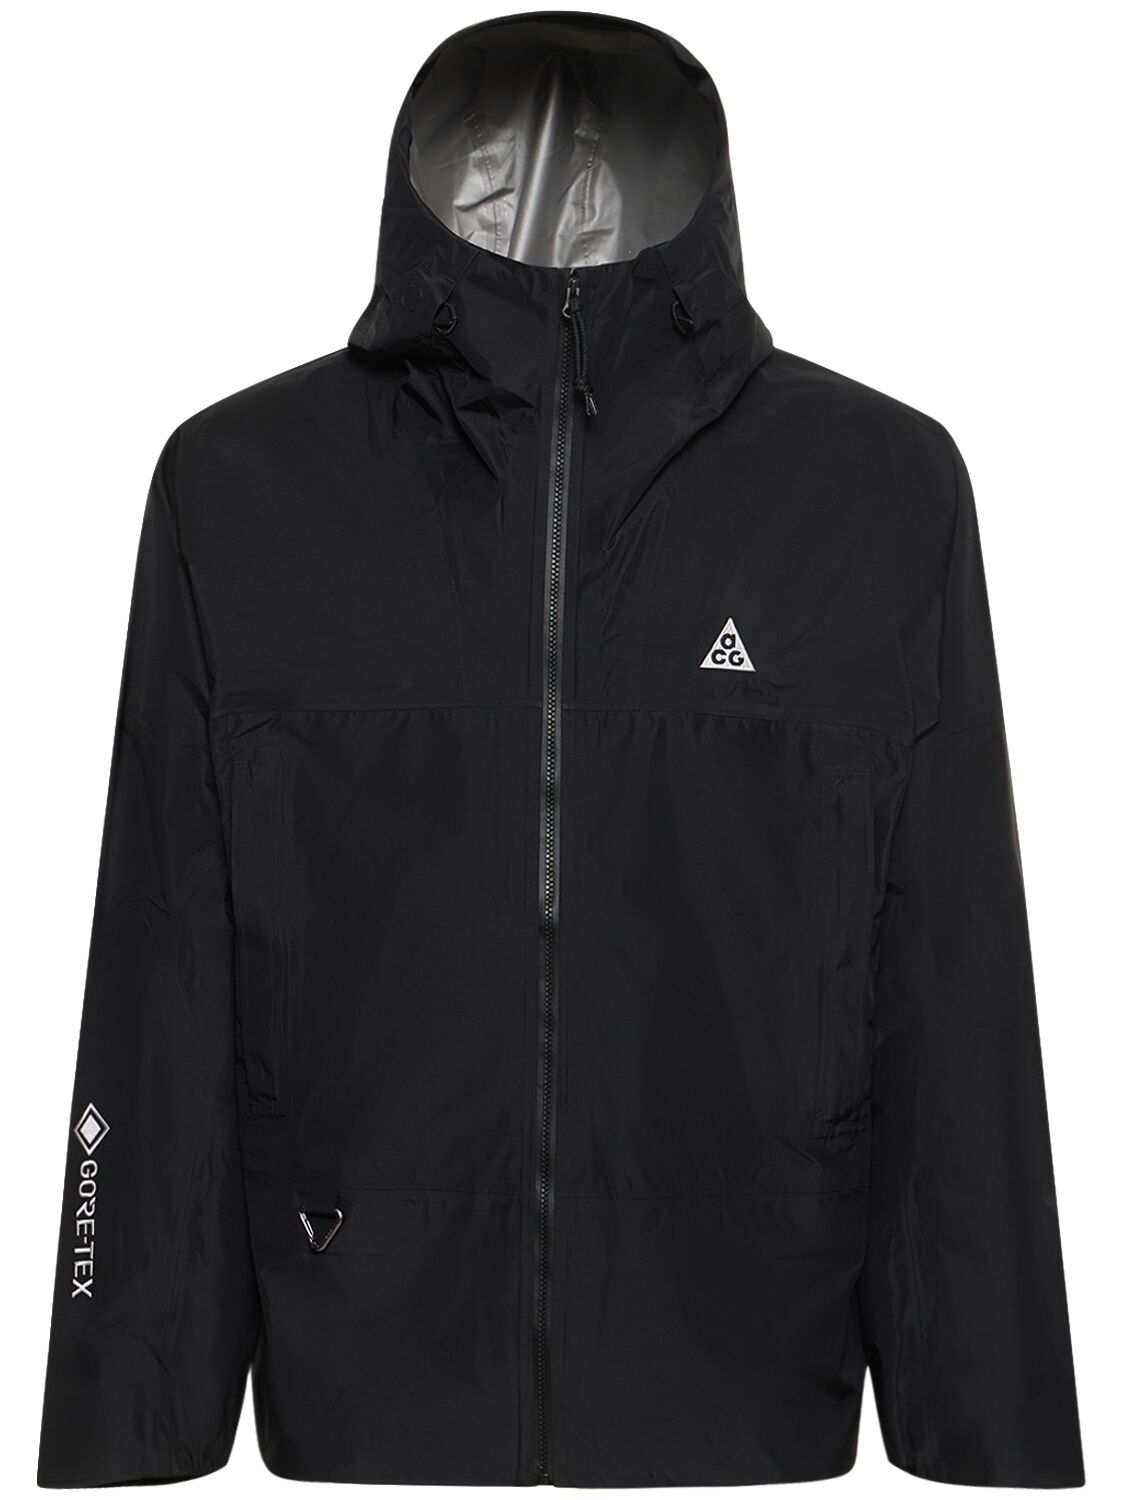 Image of Acg Storm-fit Chain Of Craters Jacket